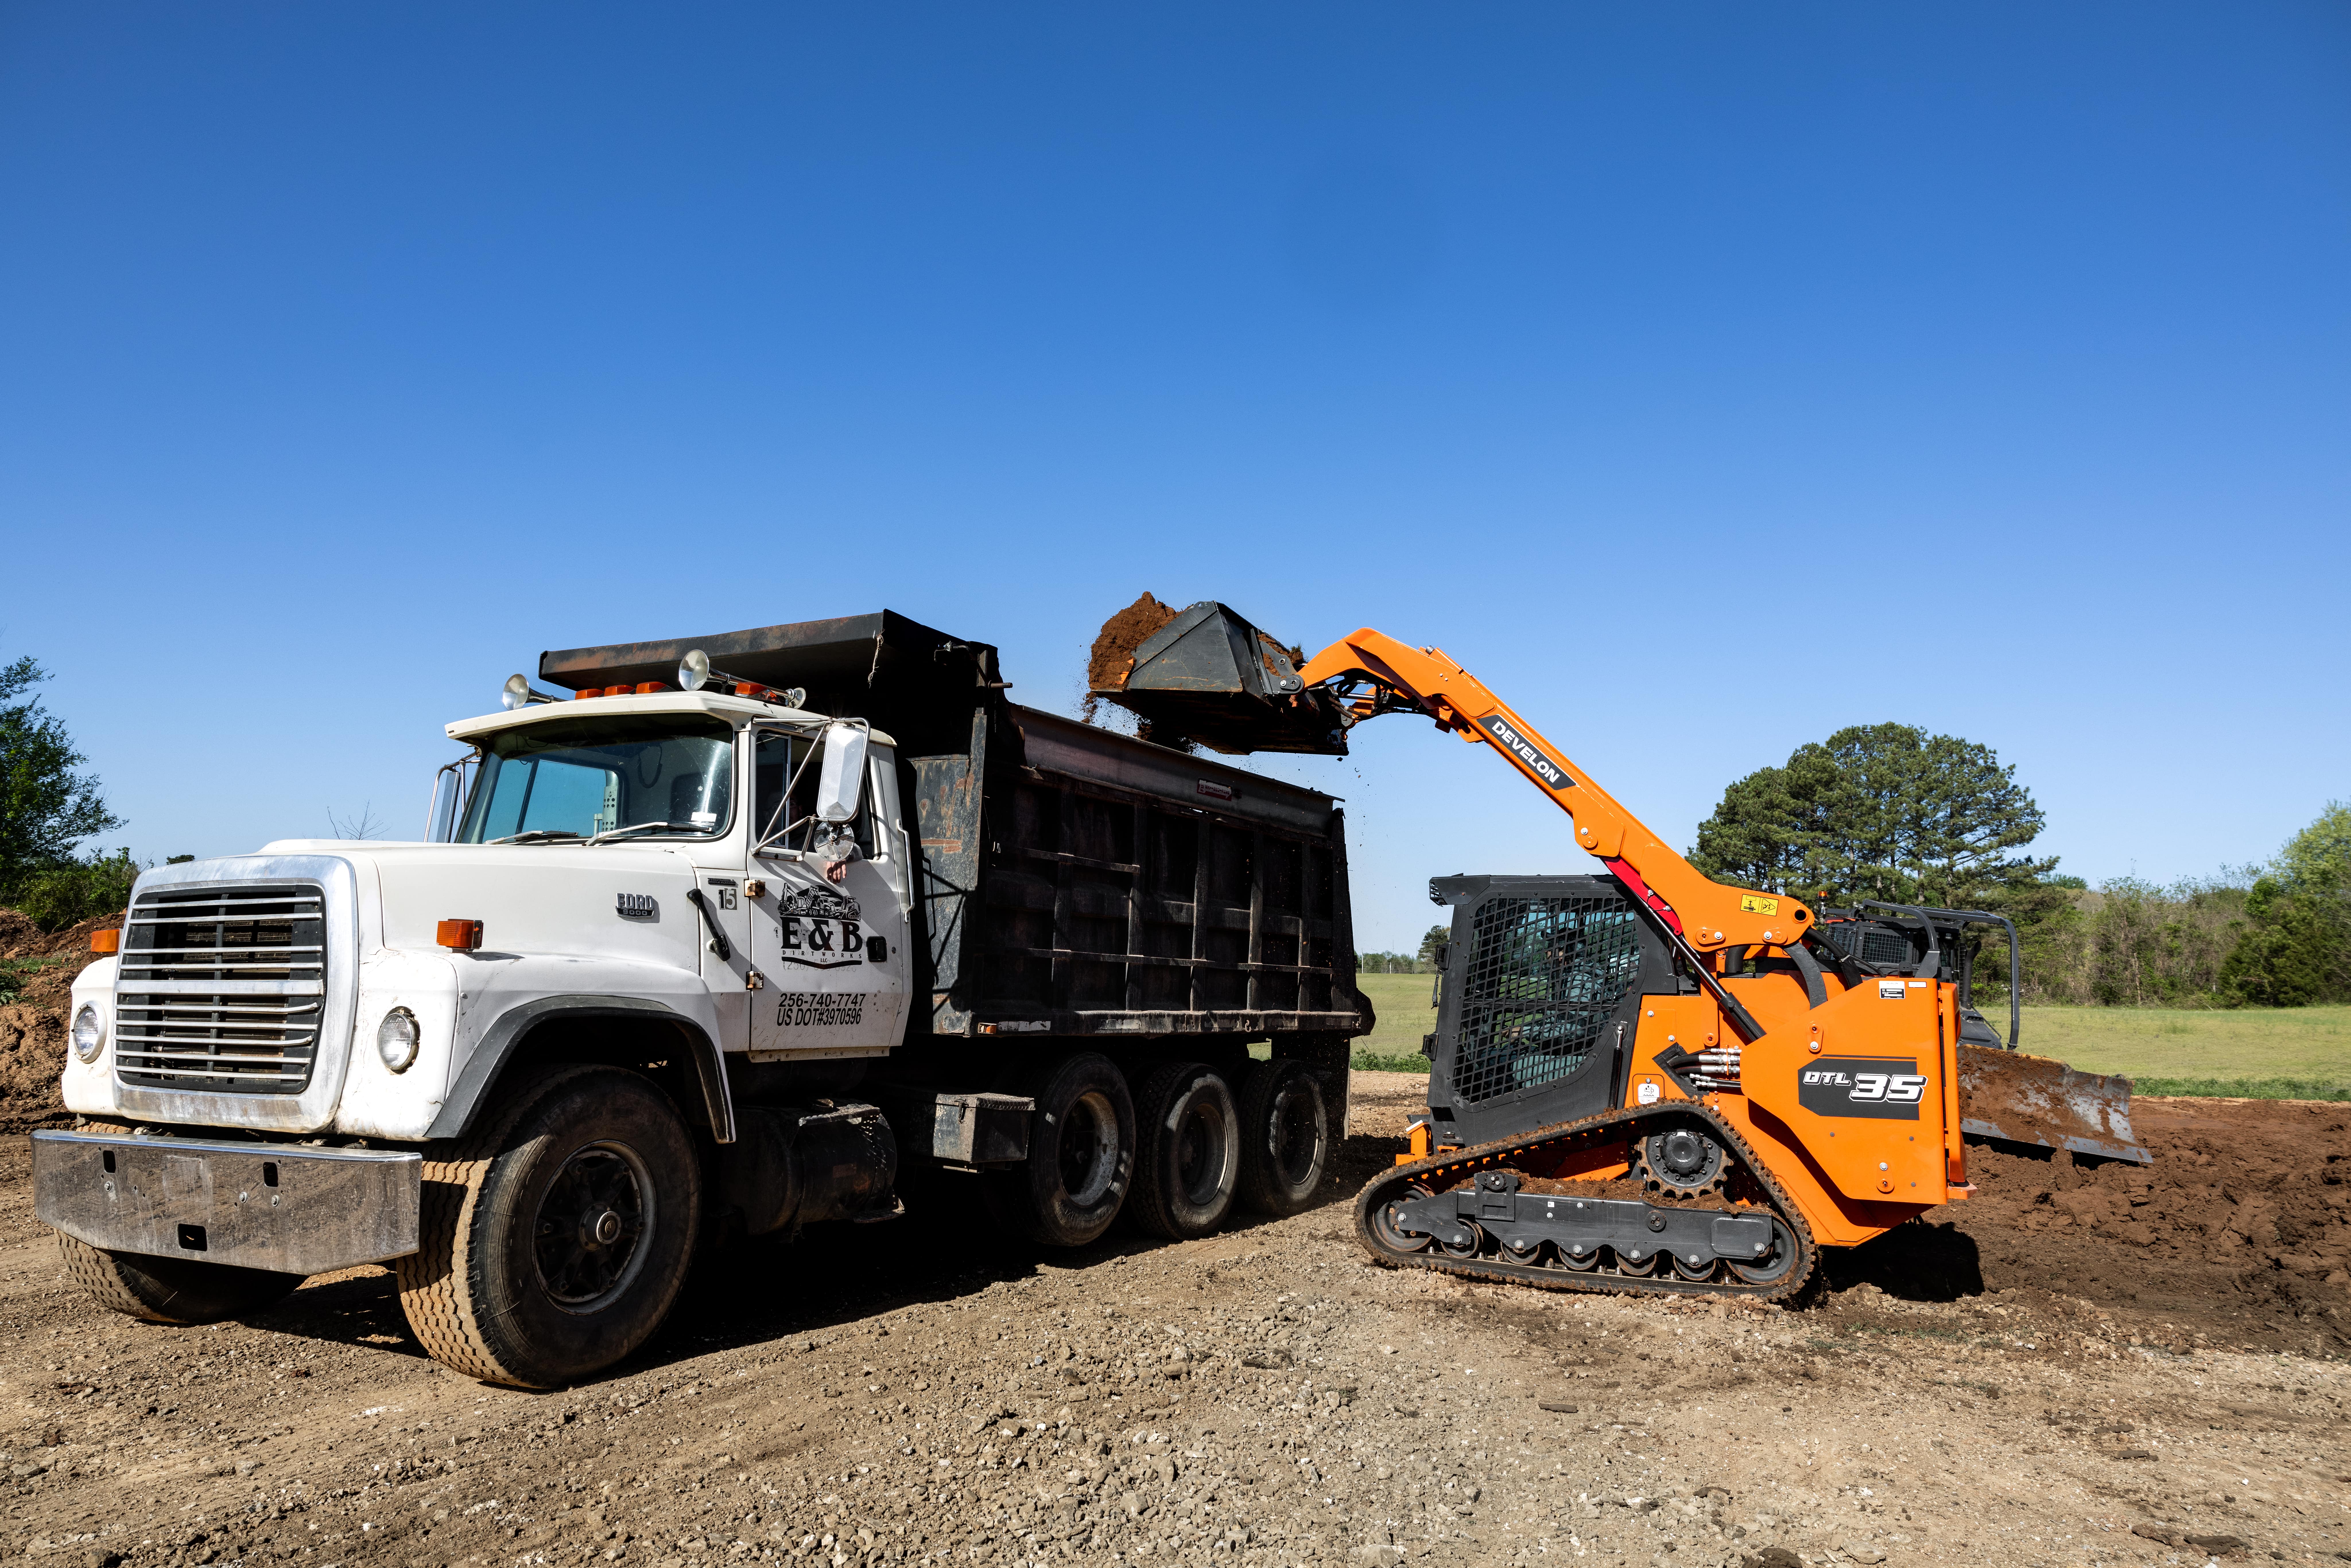 A DEVELON DTL35 compact track loader lifting a bucket filled with dirt into a high-sided dump truck.